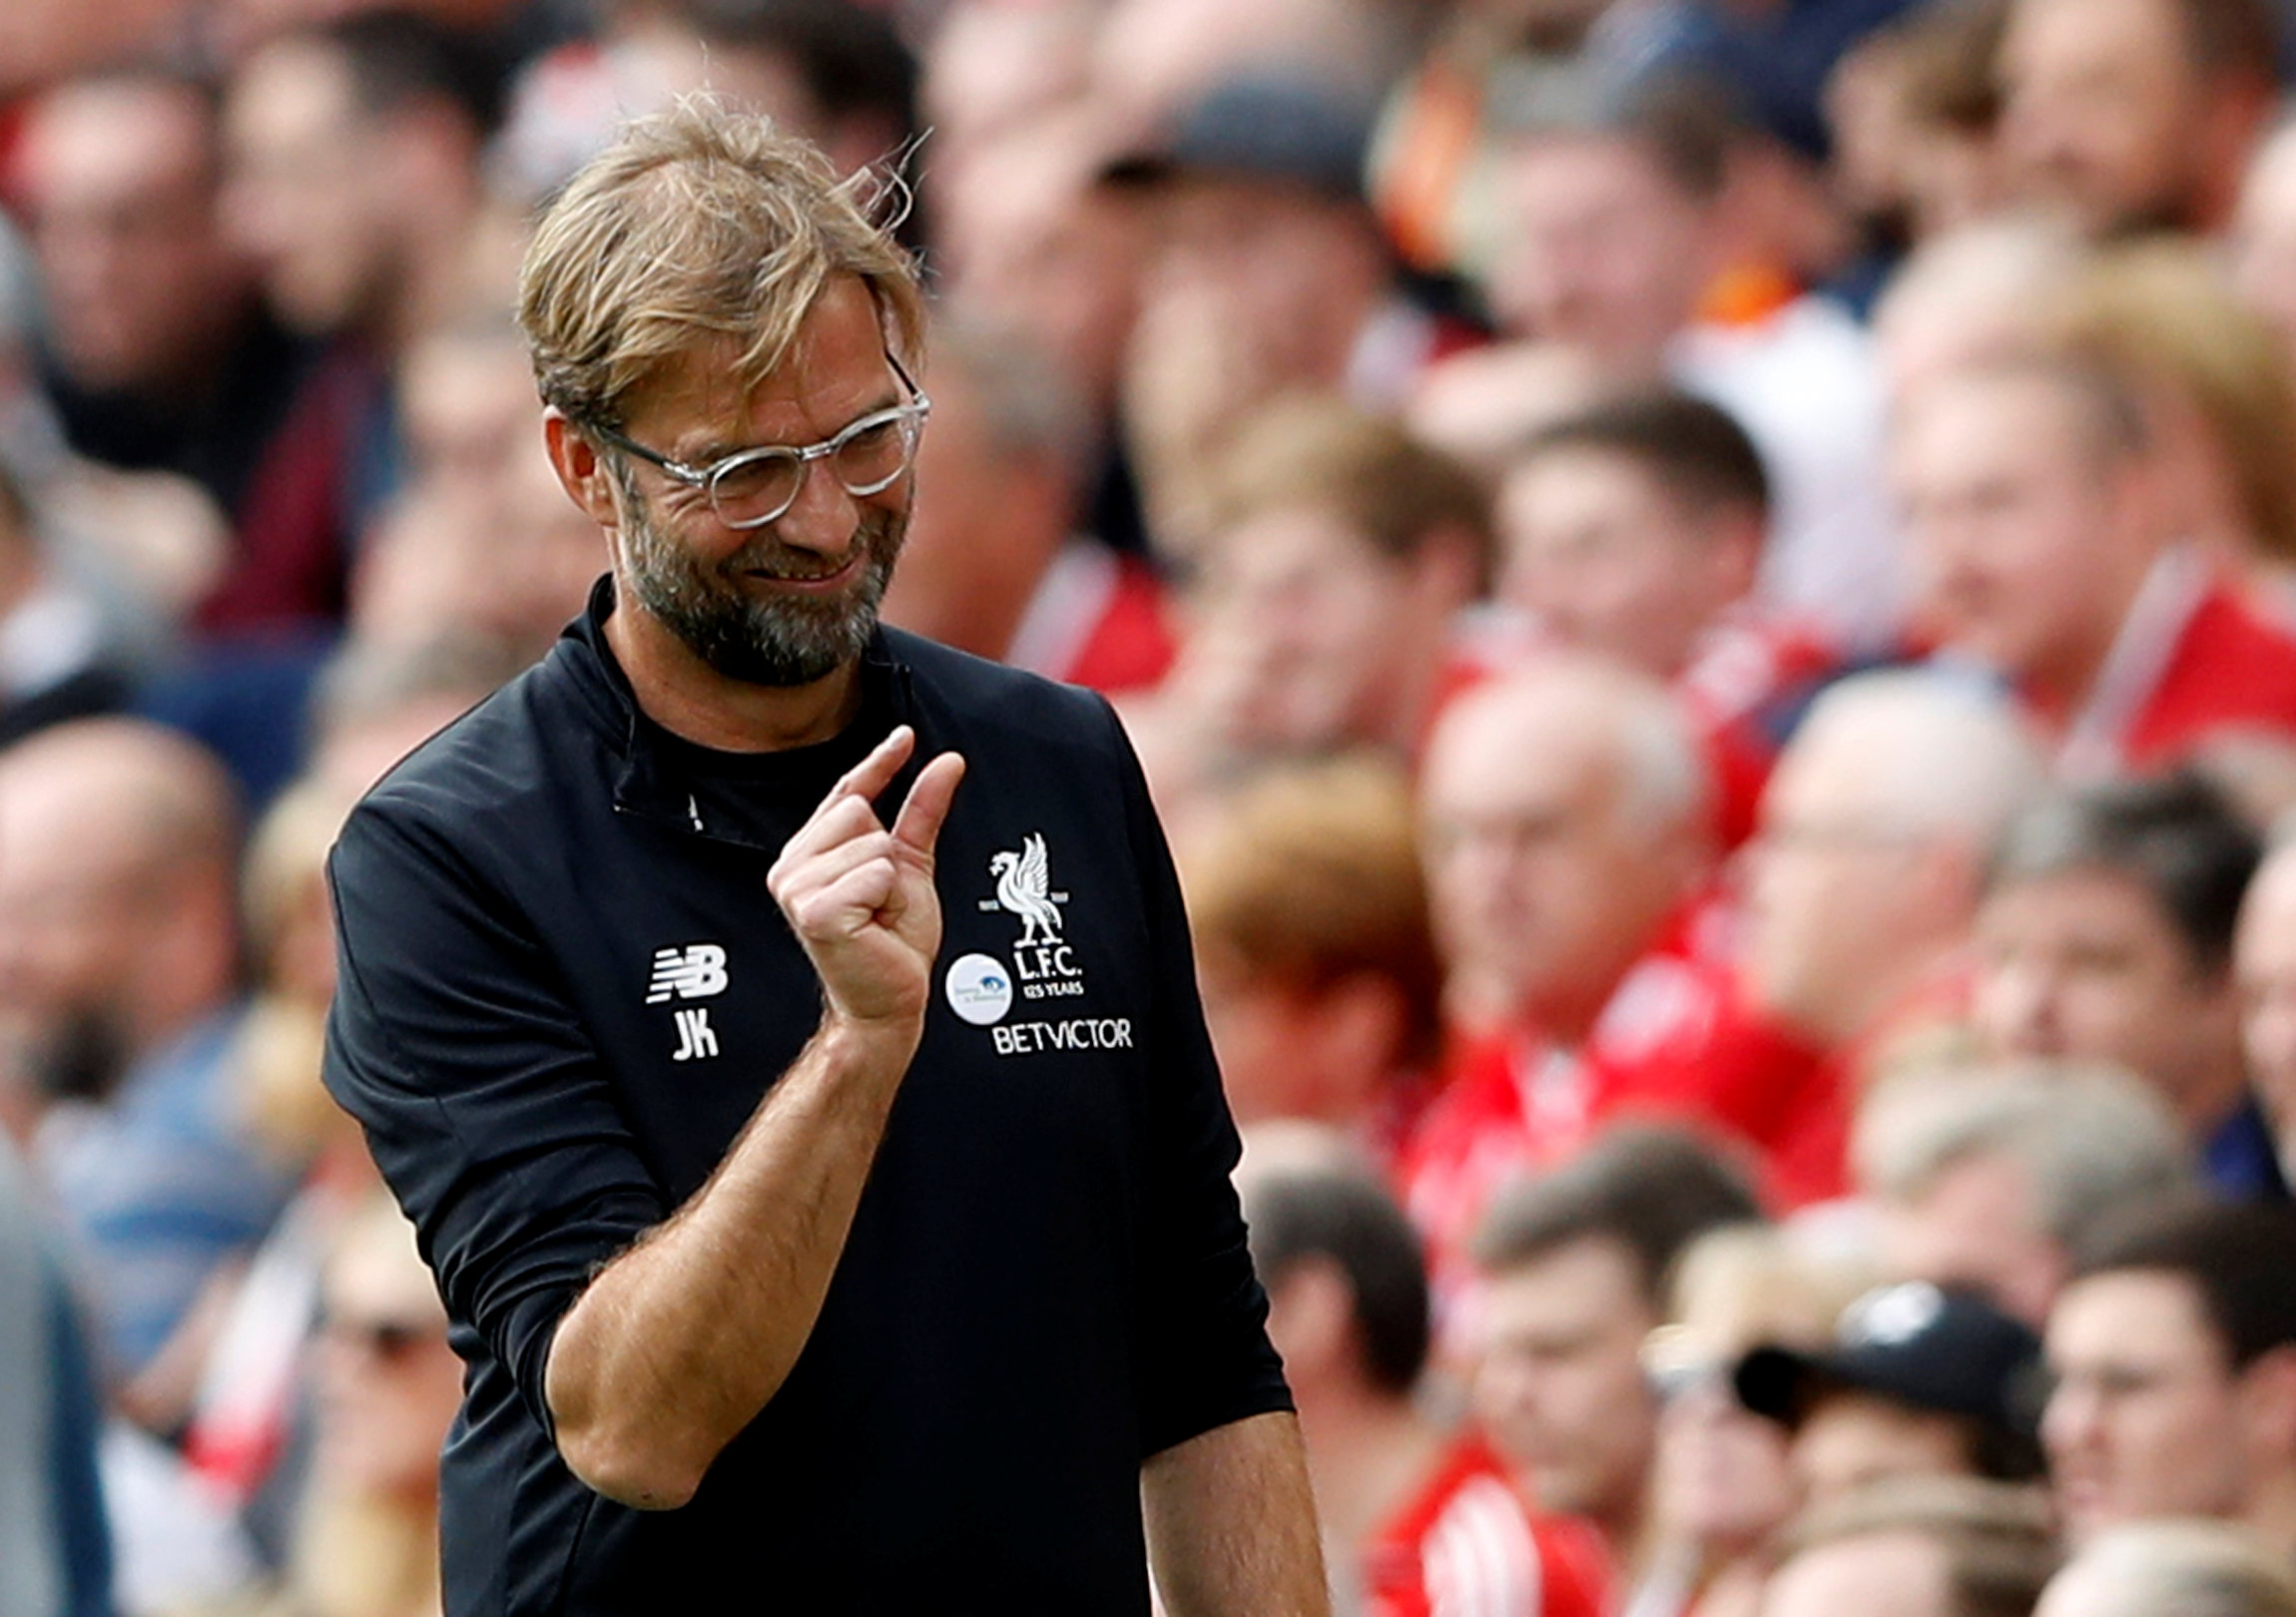 Football: Liverpool could never be as defensive as Man United, says Juergen Klopp